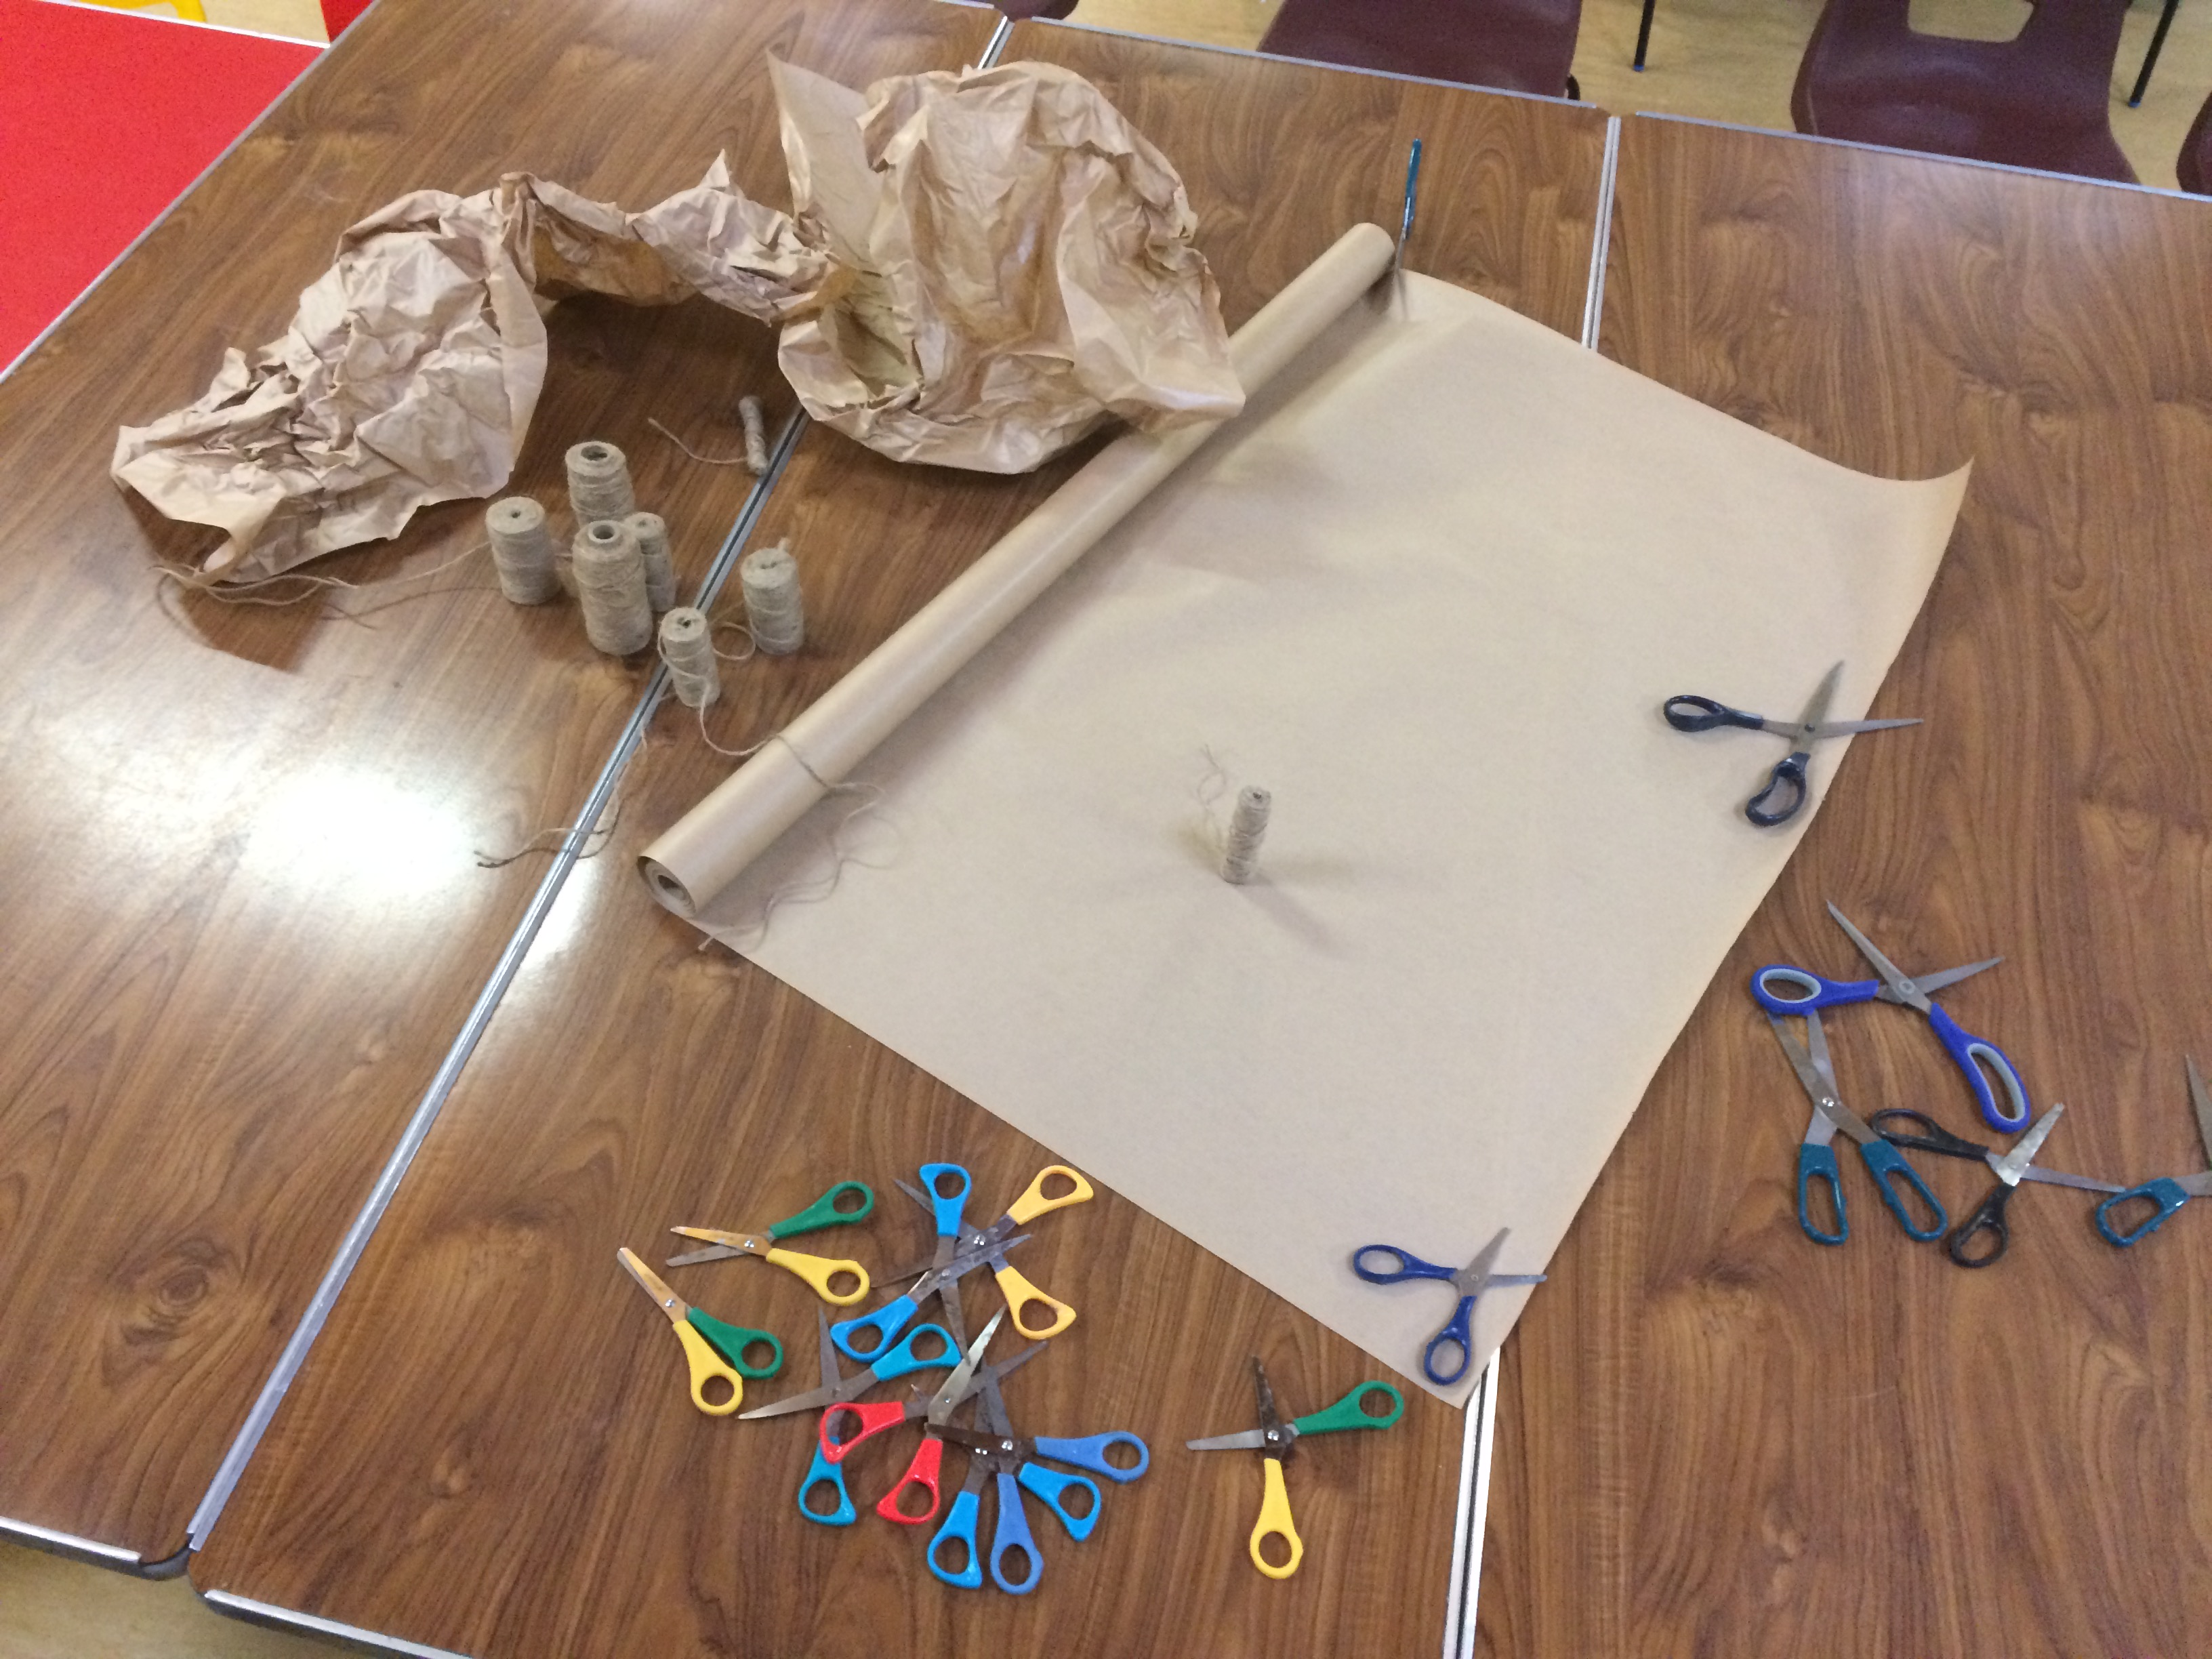 The basic materials before the puppets were created.